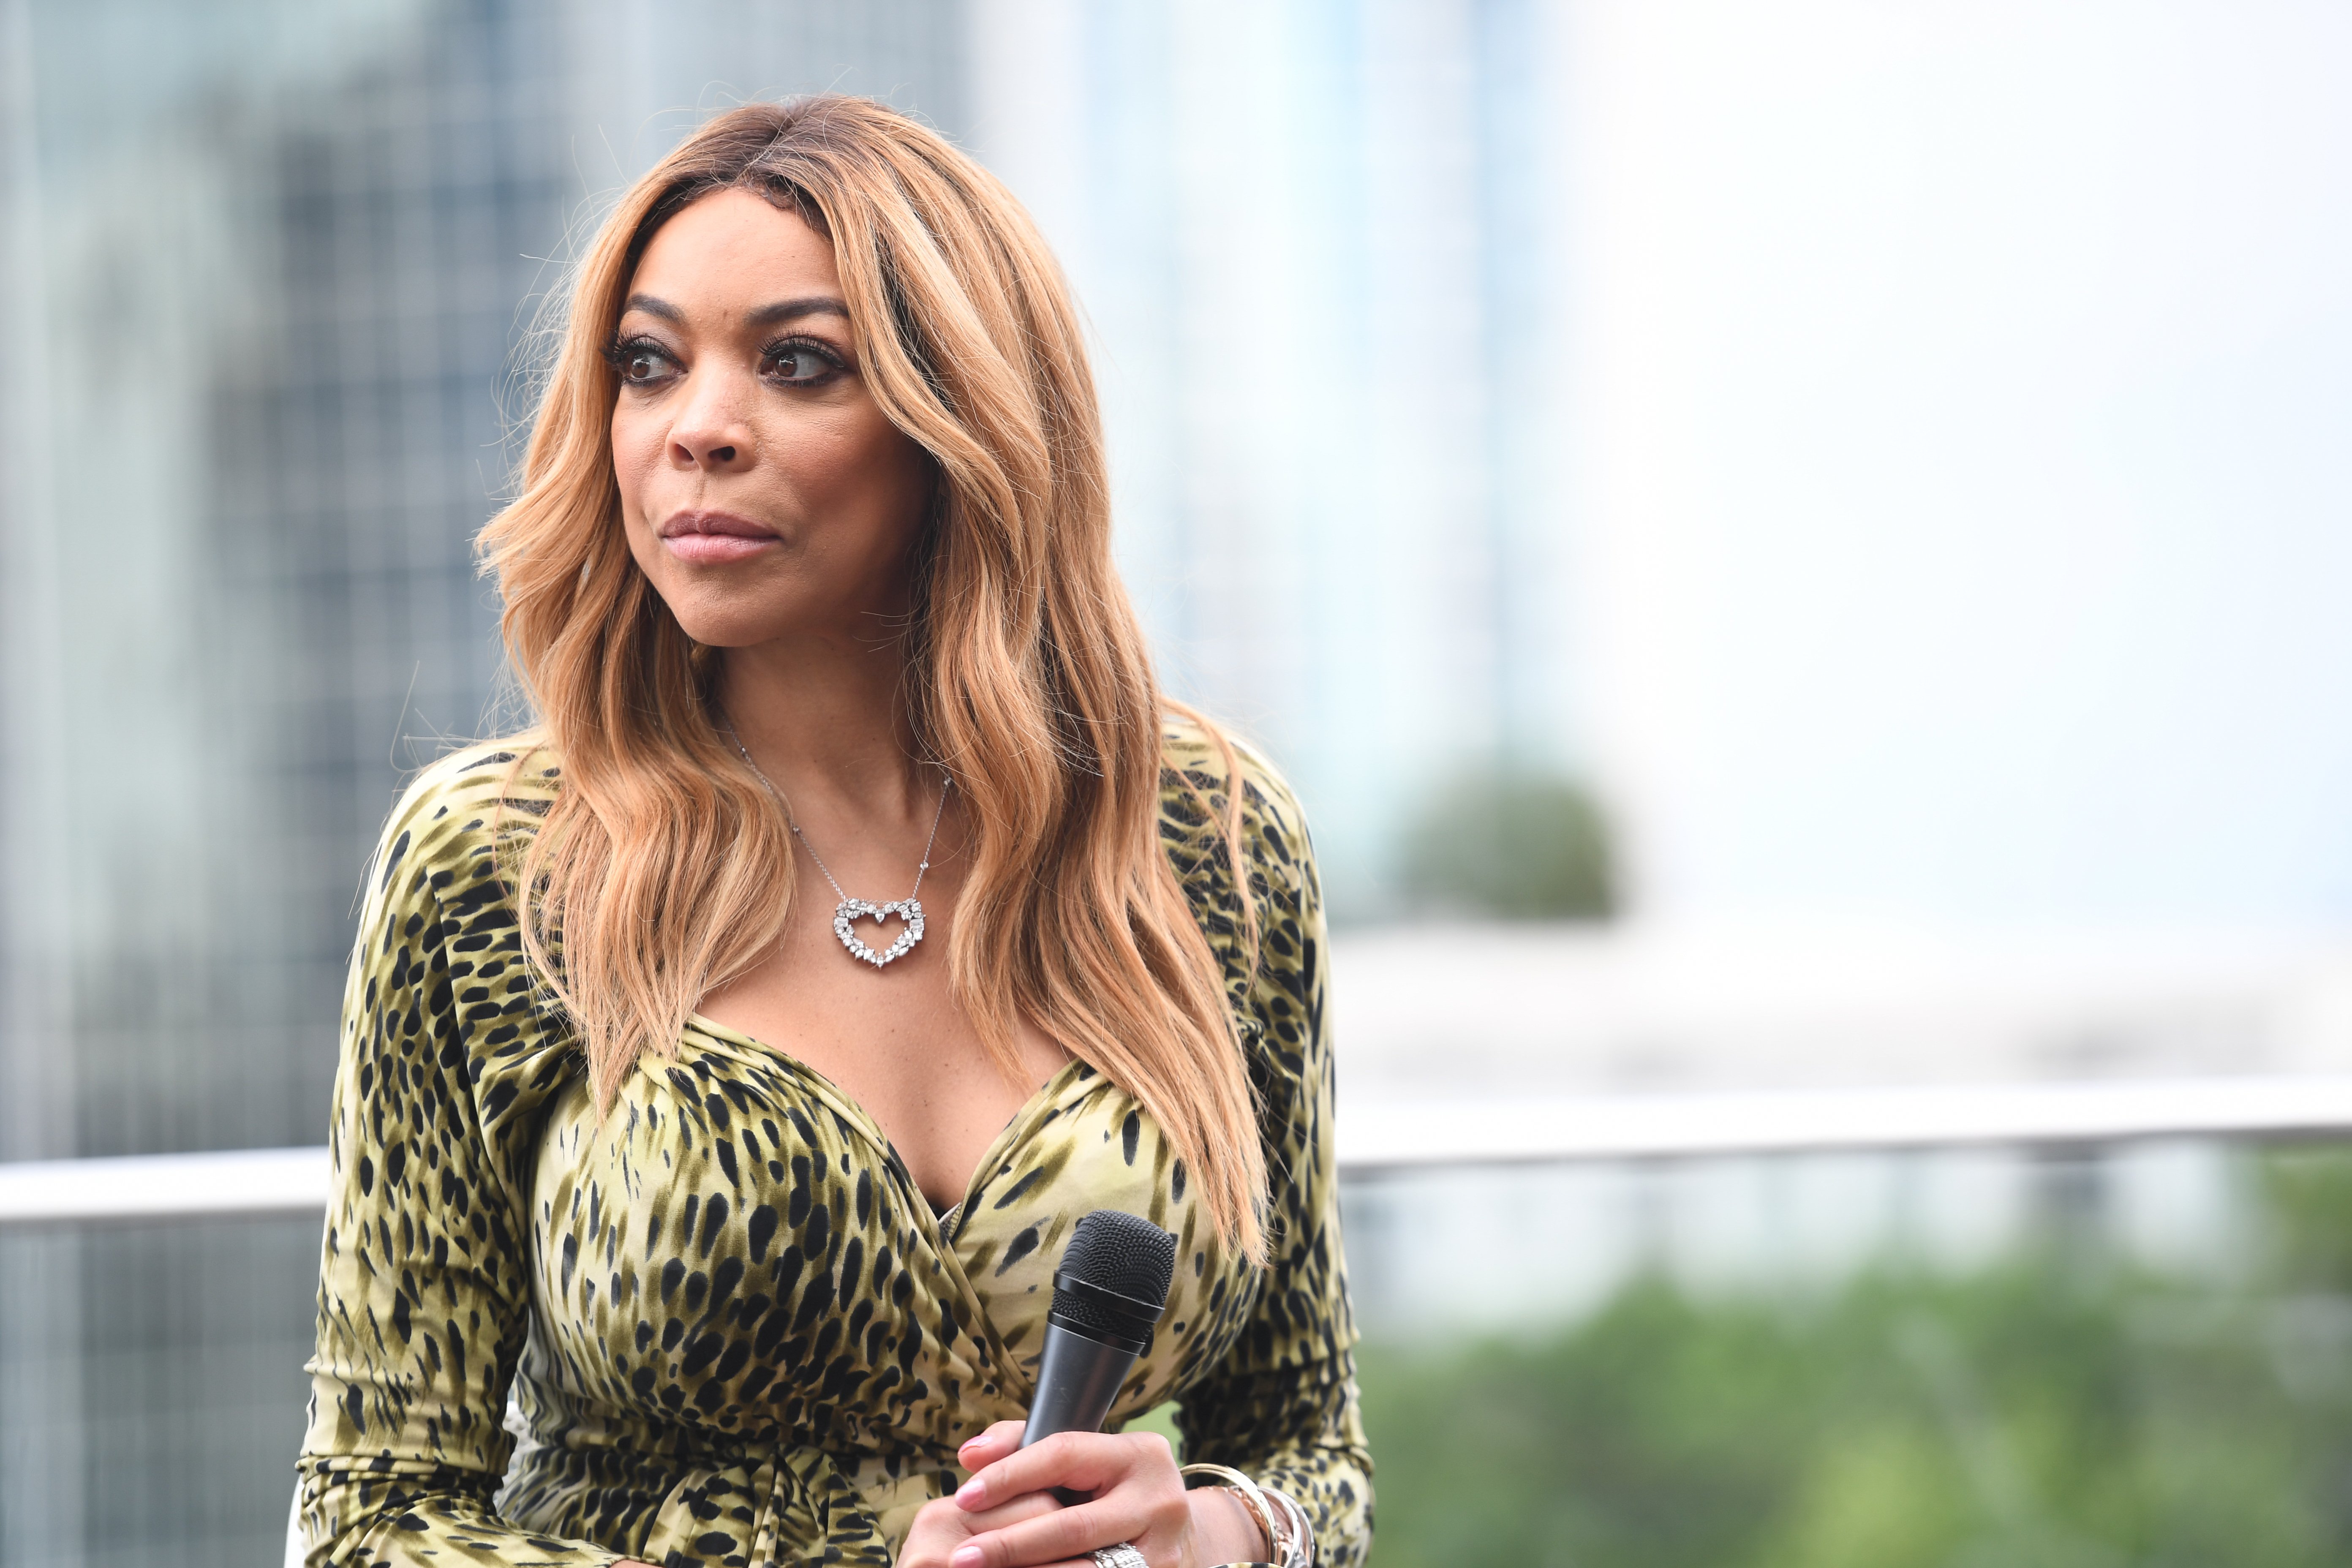 Wendy Williams attends Wendy Digital Event at Atlanta Tech Village Rooftop on August 29, 2017. | Photo: Getty Images